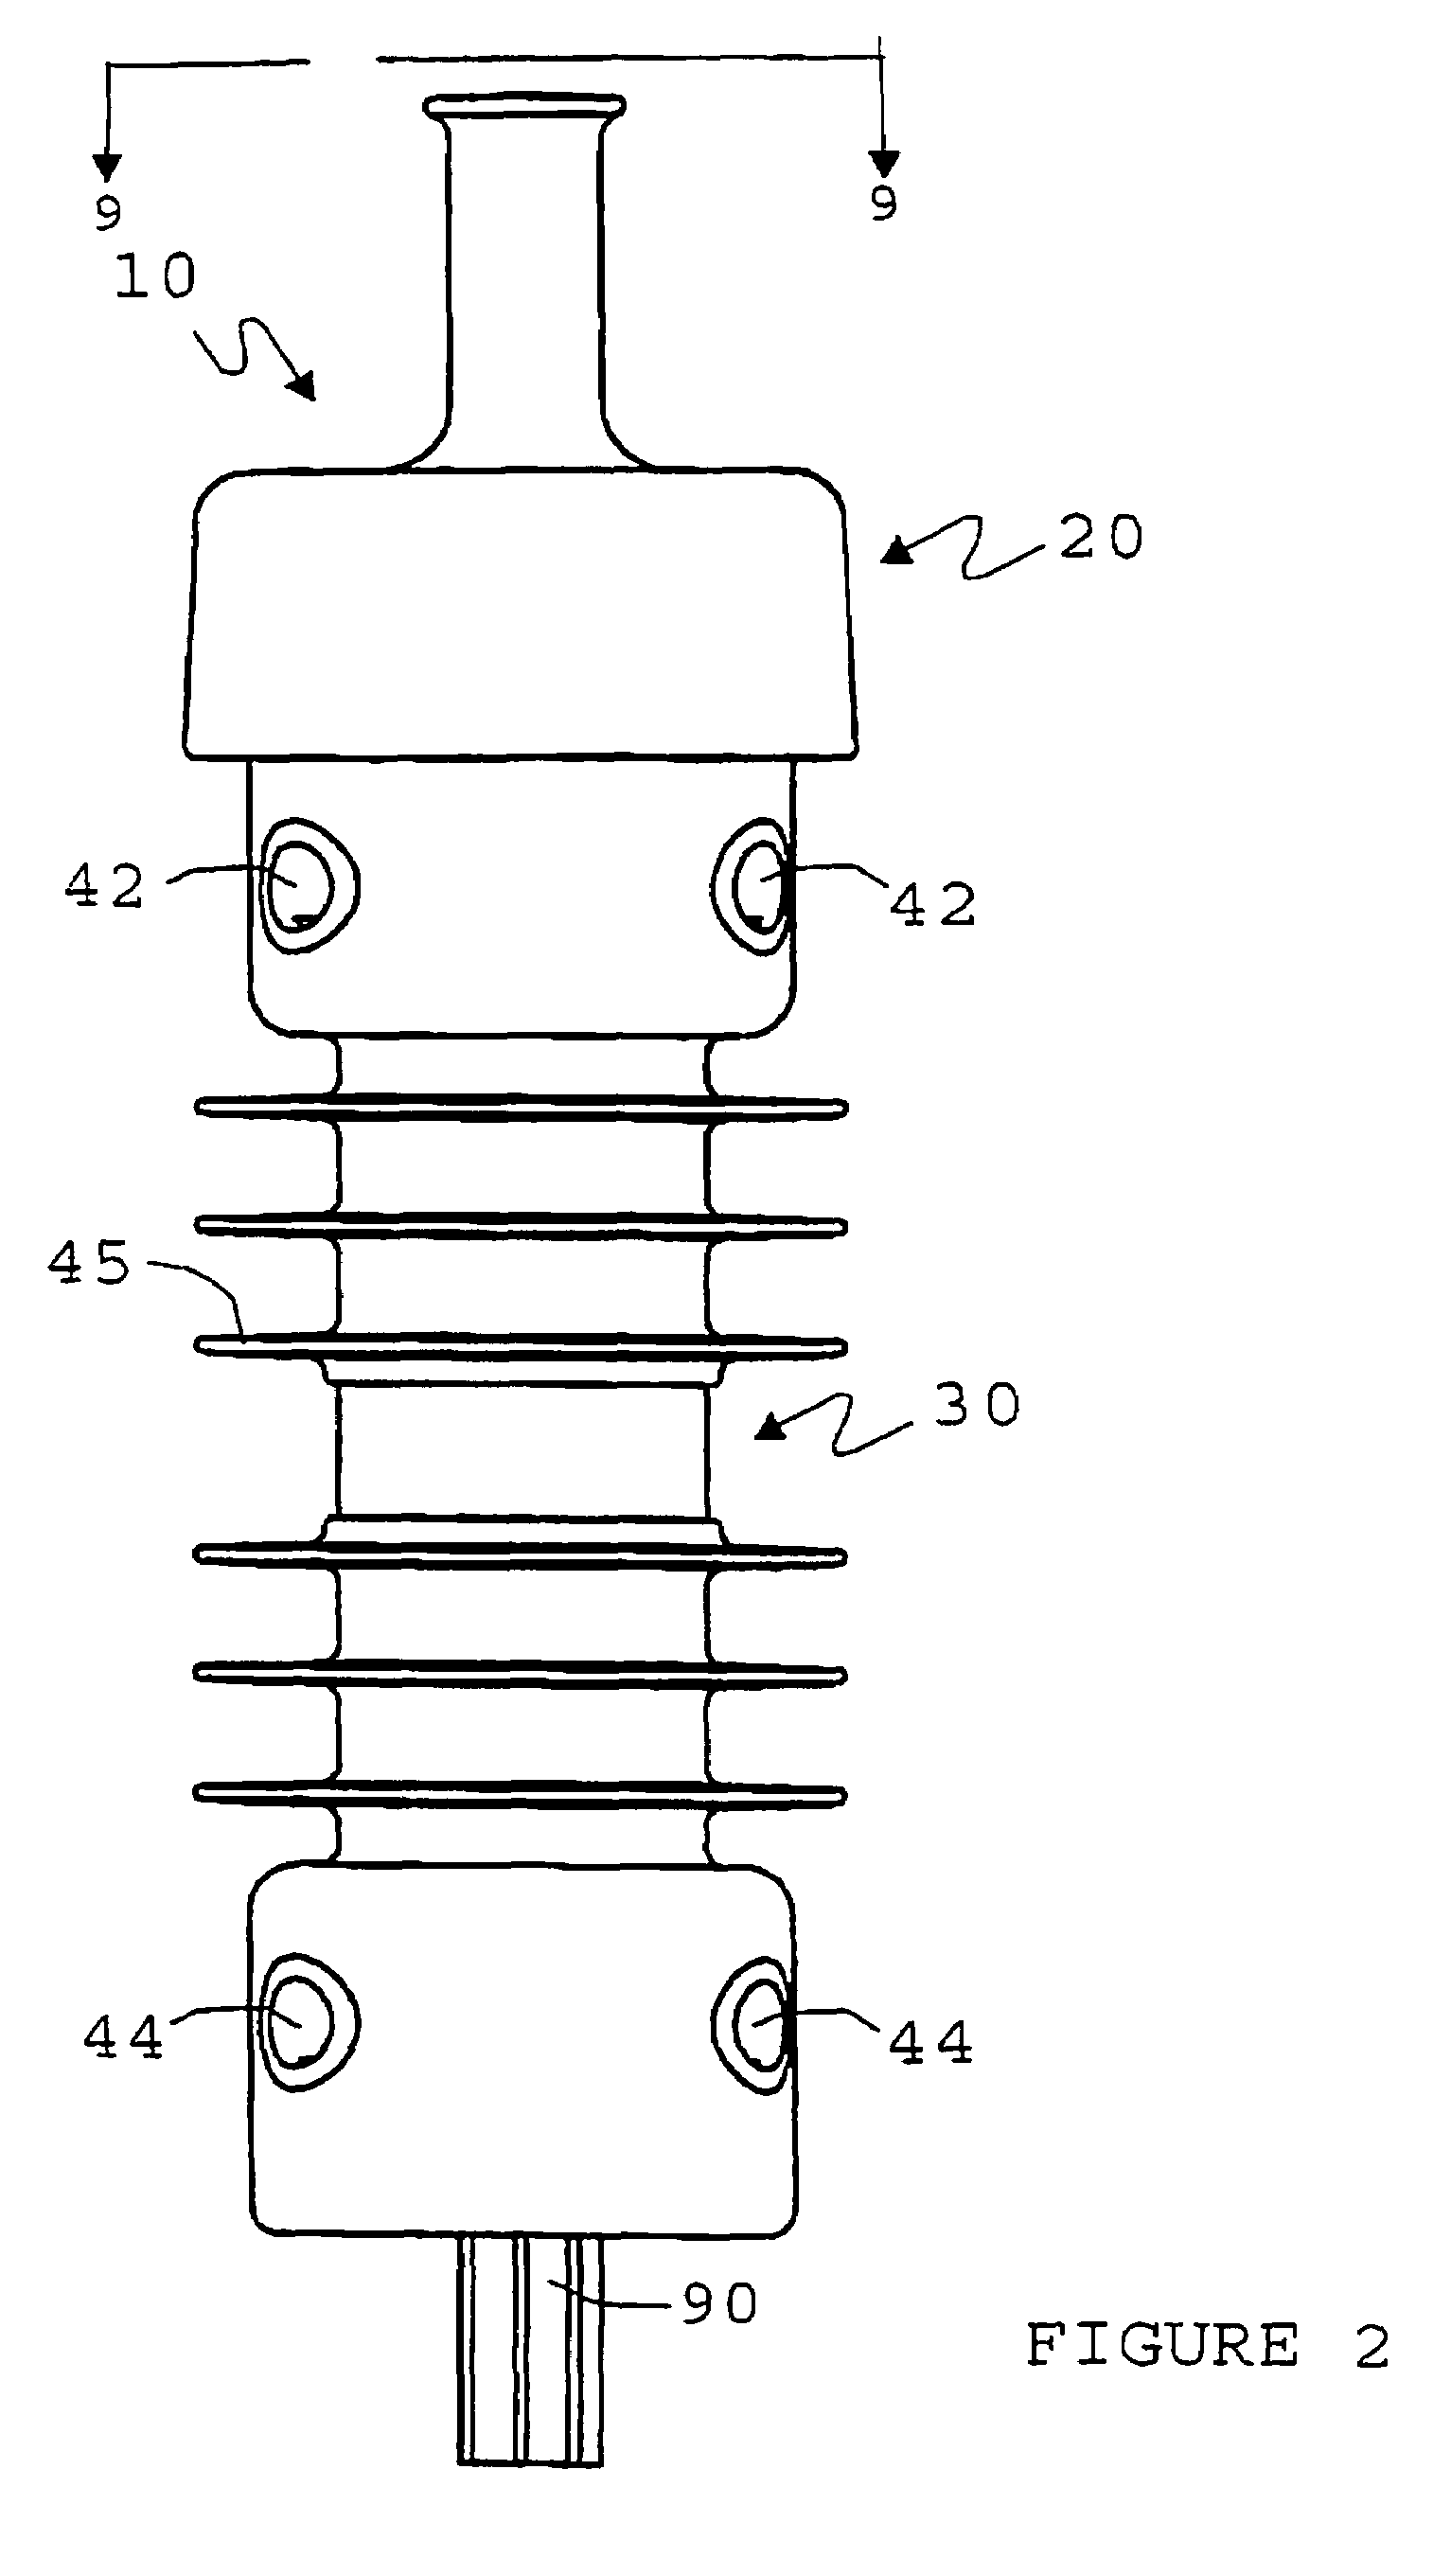 Enclosed insulator assembly for high-voltage distribution systems